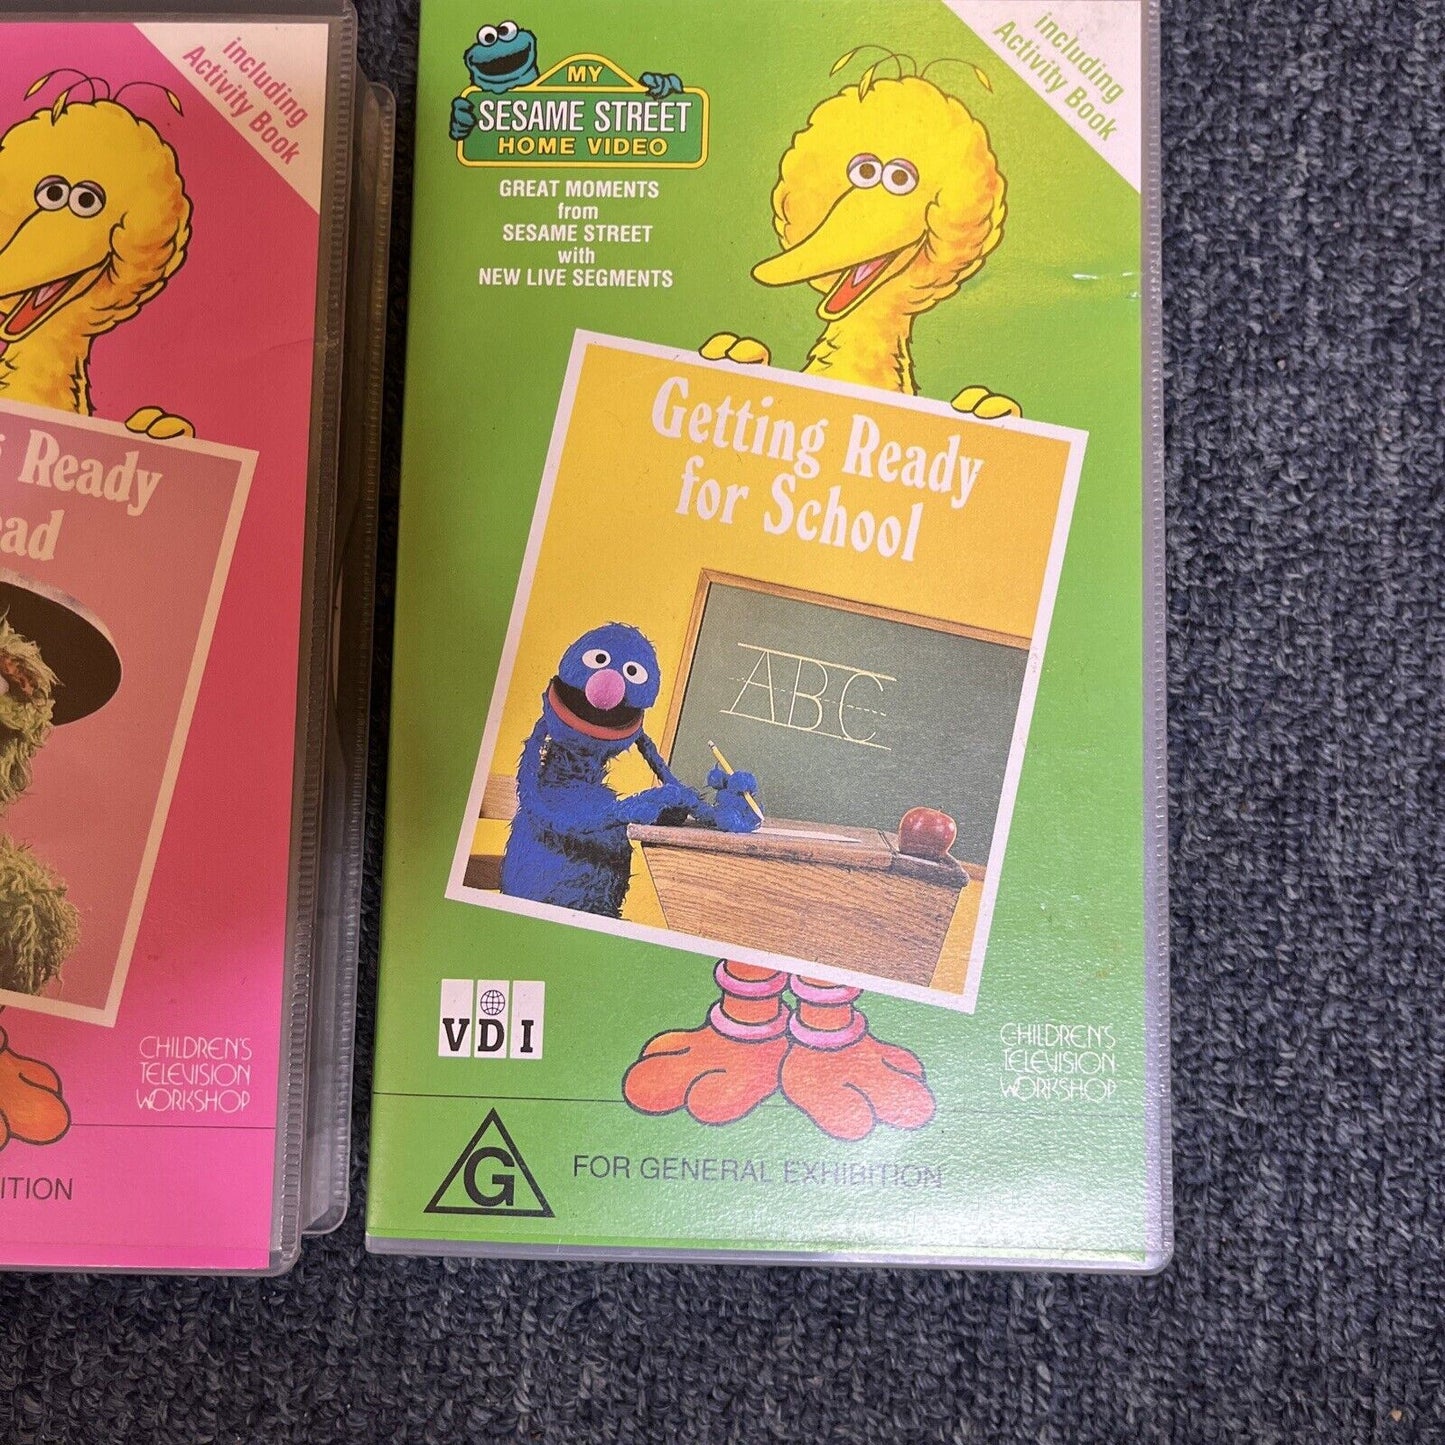 Sesame Street - Getting Ready to Read, Getting Ready For School (VHS, 1991) PAL